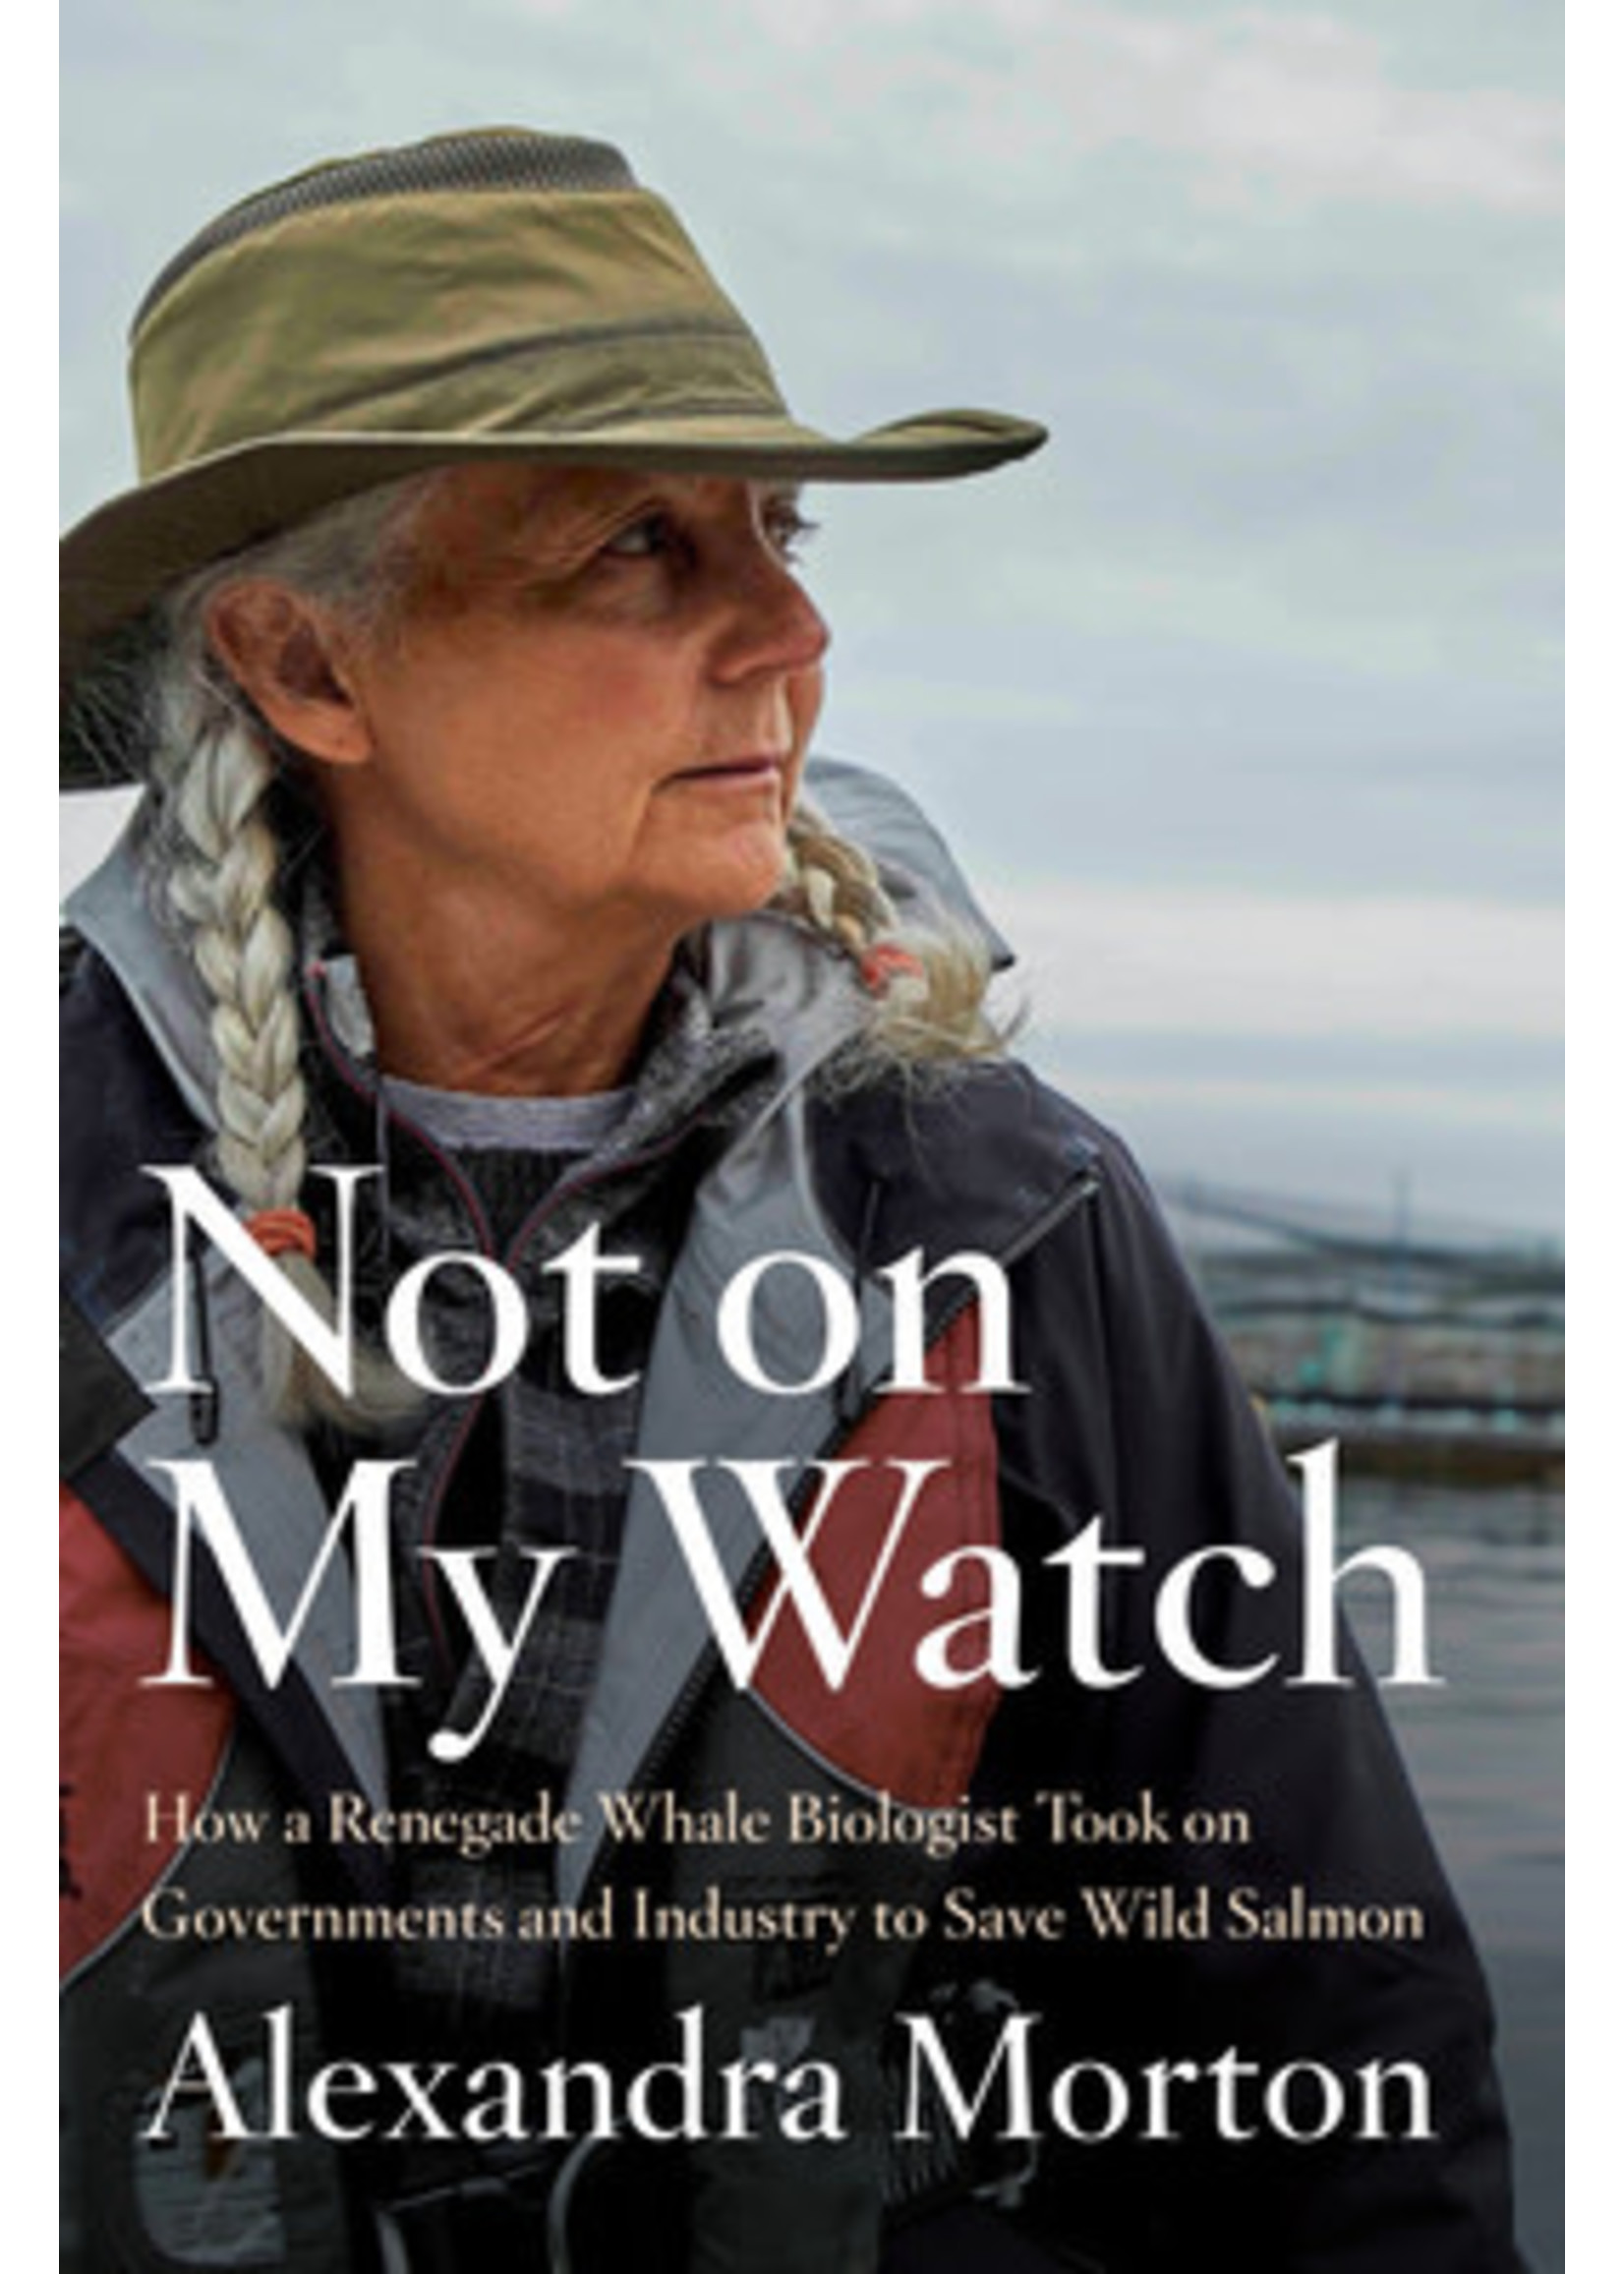 Not on My Watch: How a Renegade Whale Biologist Took on Governments and Industry to Save Wild Salmon by Alexandra Morton